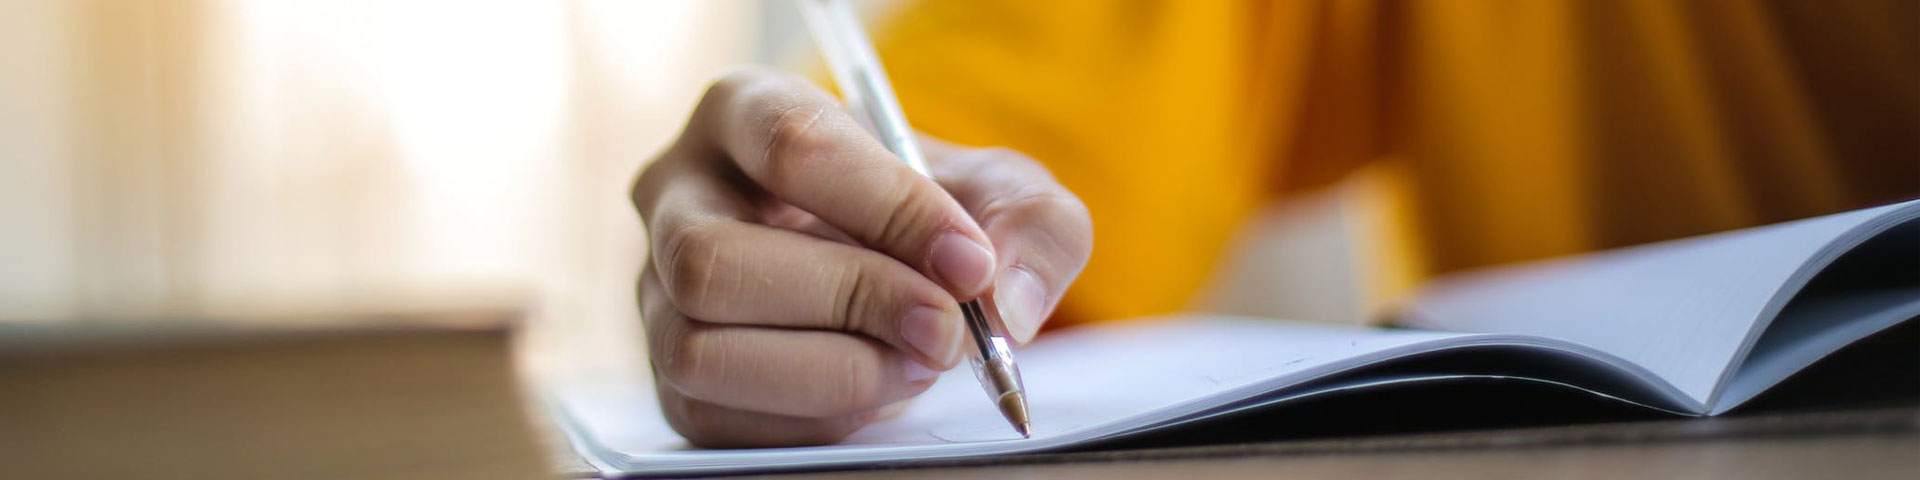 A close up of a human right hand holding a pen writing on a booklet.